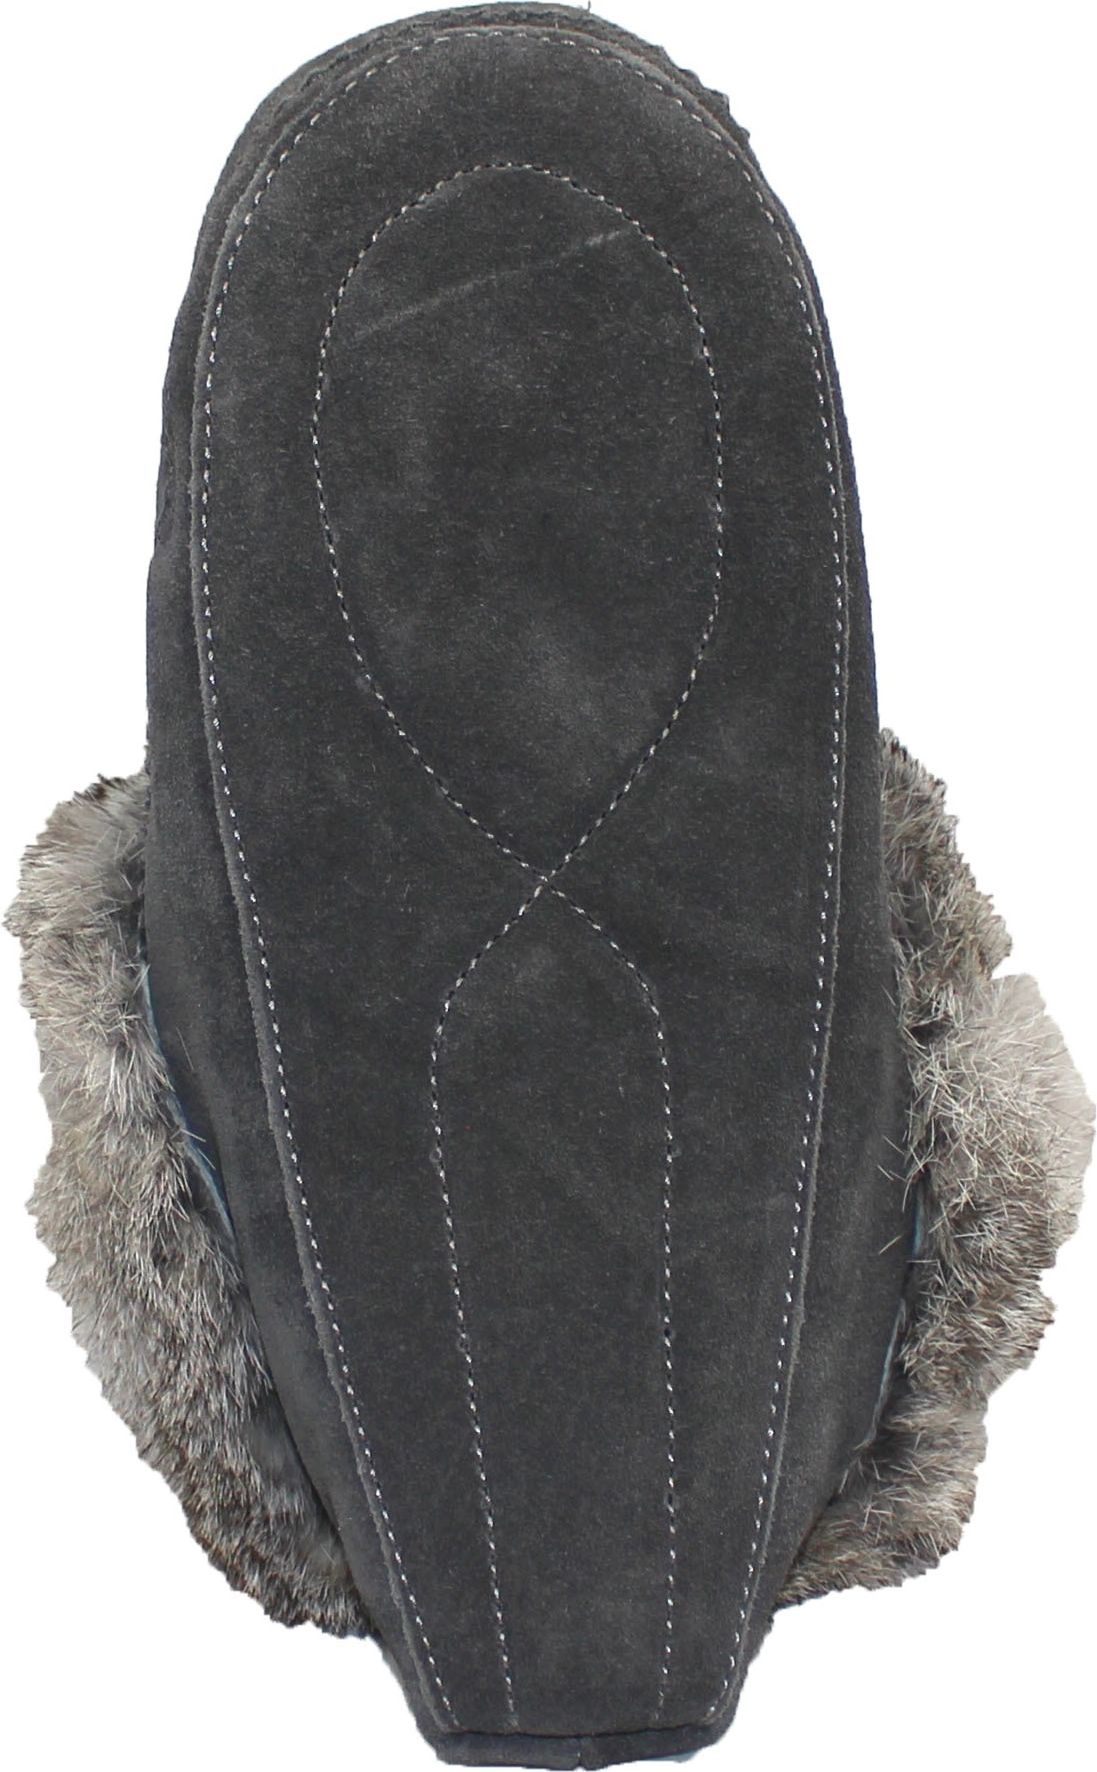 Urban Trail Slippers Beaded Mocc With Fur Trim Charcoal